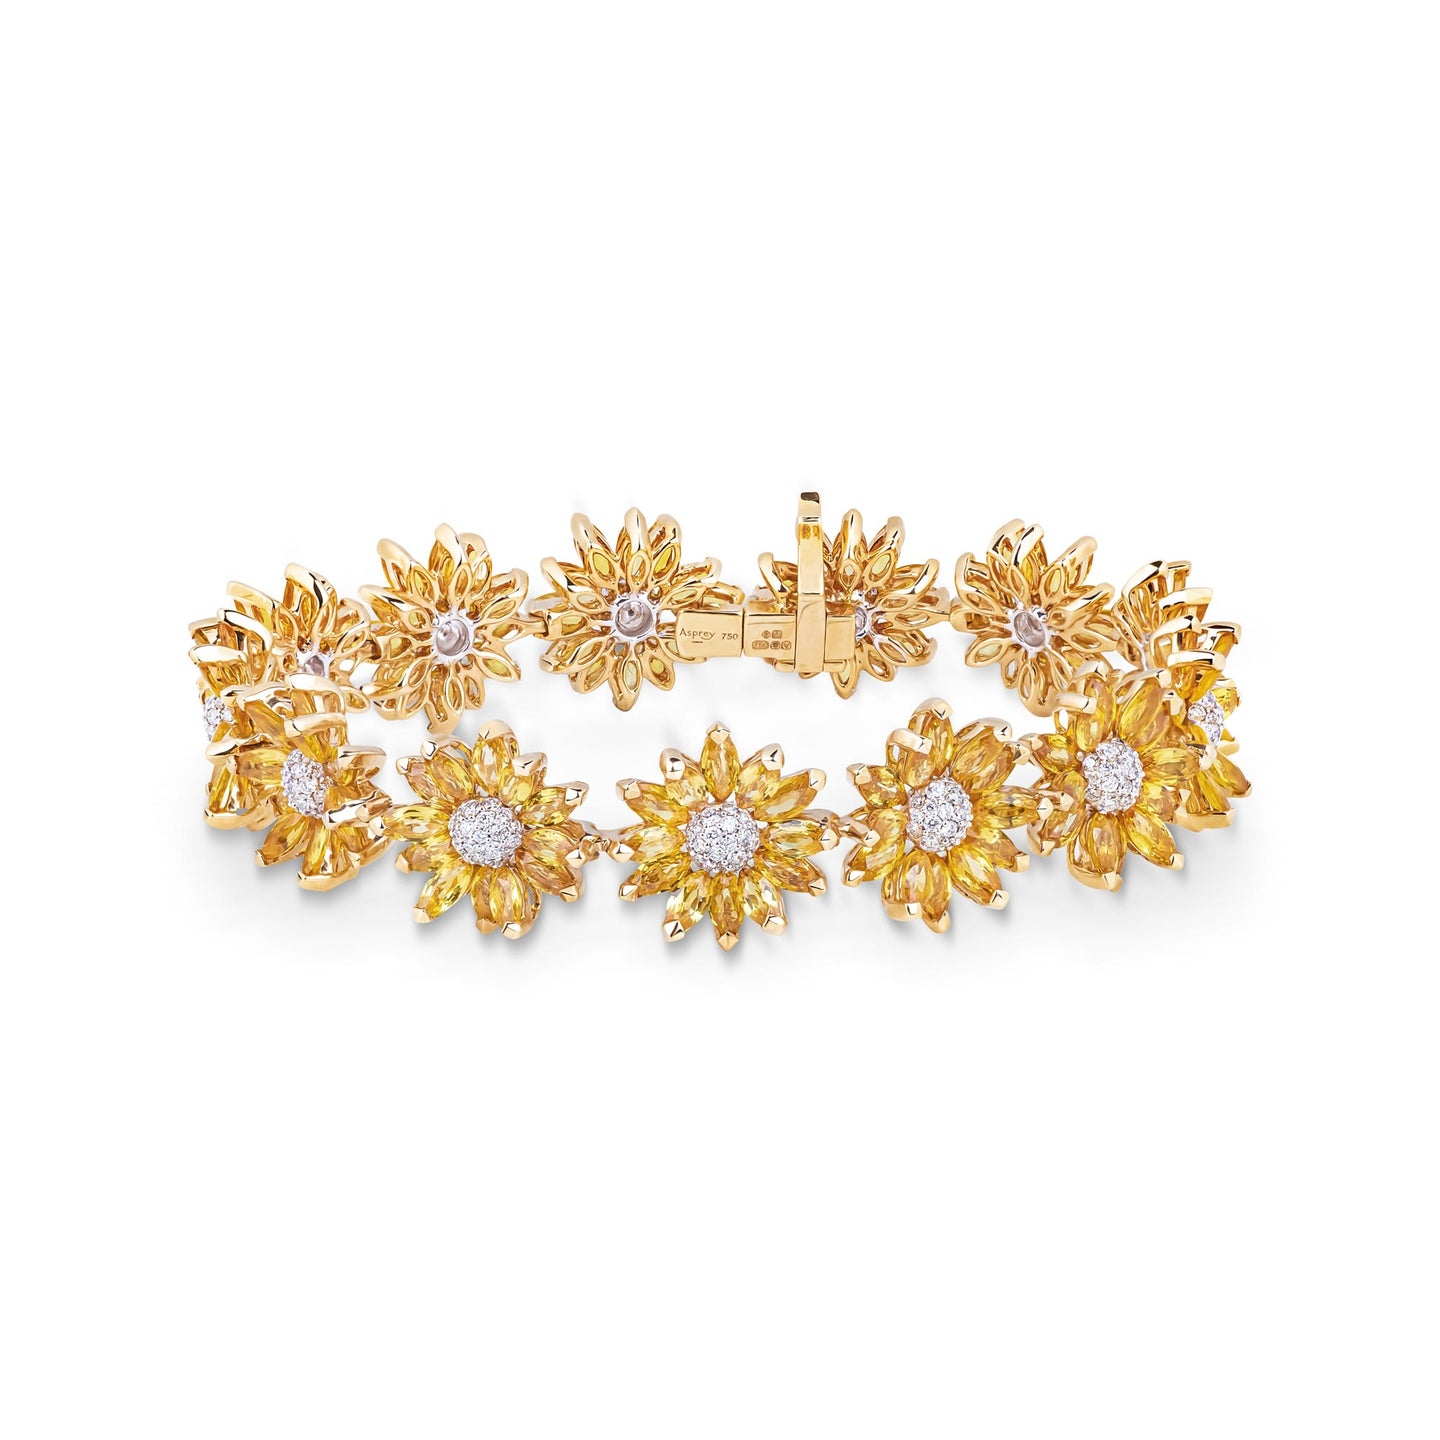 Daisy Bracelet in 18ct Gold with Yellow Sapphire and Diamonds